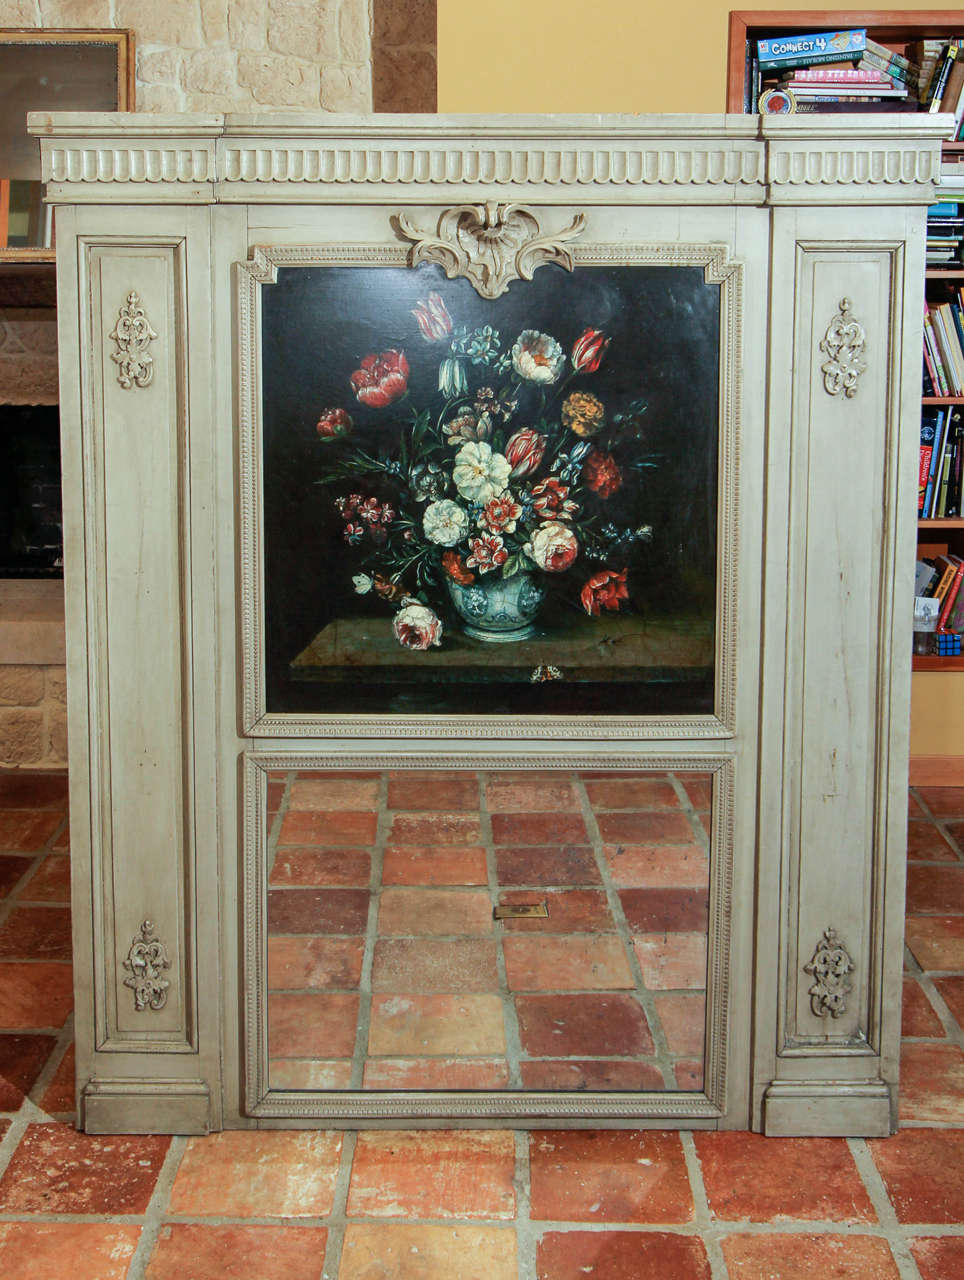 French Painted Trumeau Mirror

This a very decorative Louis XV style mirror.  

It features an oil on board floral still-life painting on the top and the original glass mirror on the bottom. 

The frame has two columns running up and down each